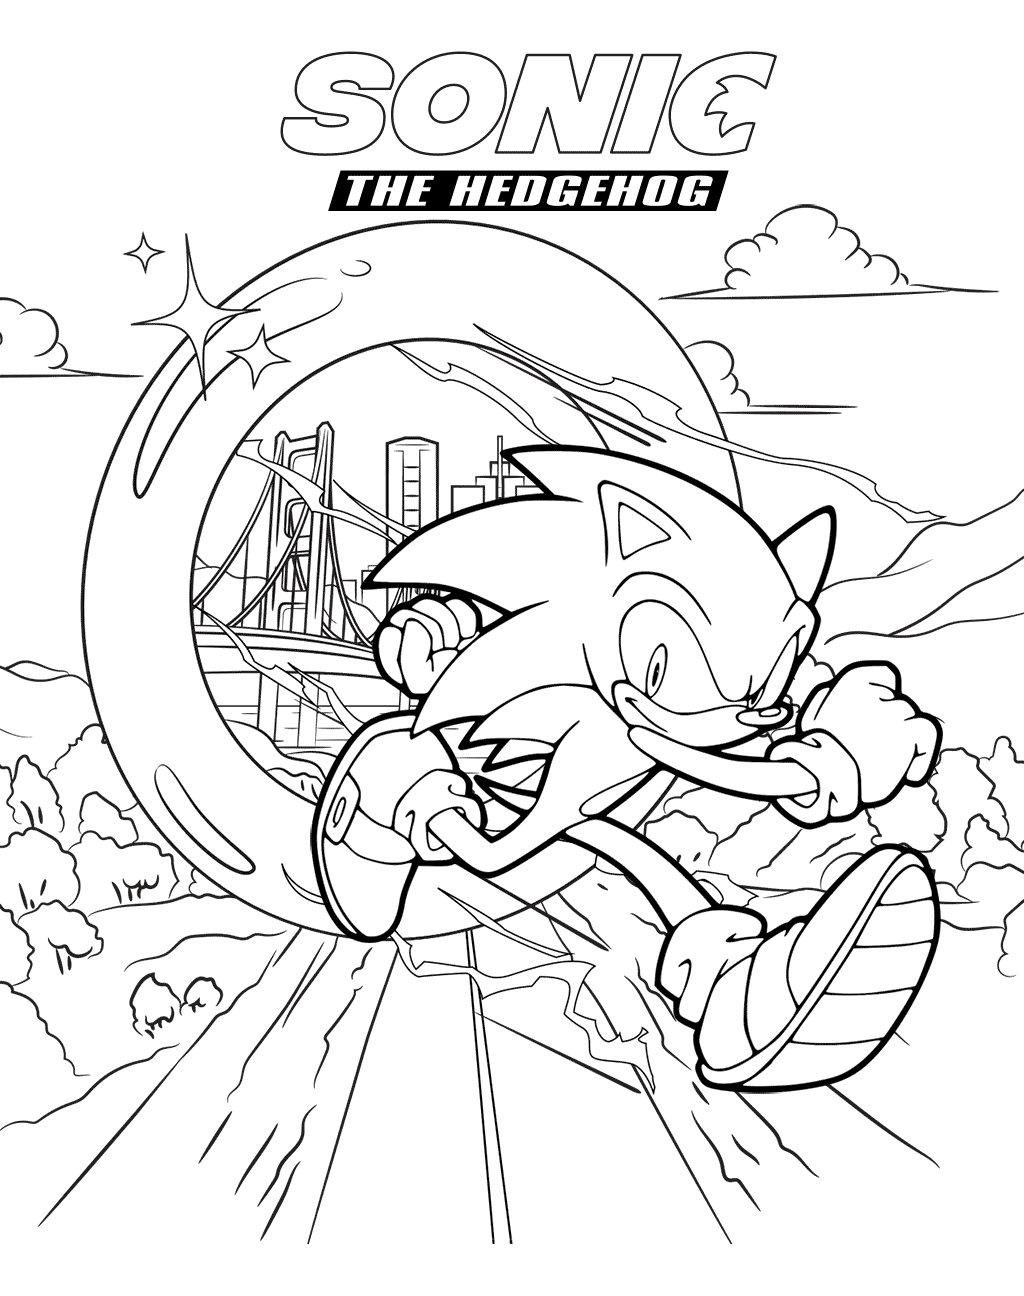 Sonic 2 Coloring Pages to Print